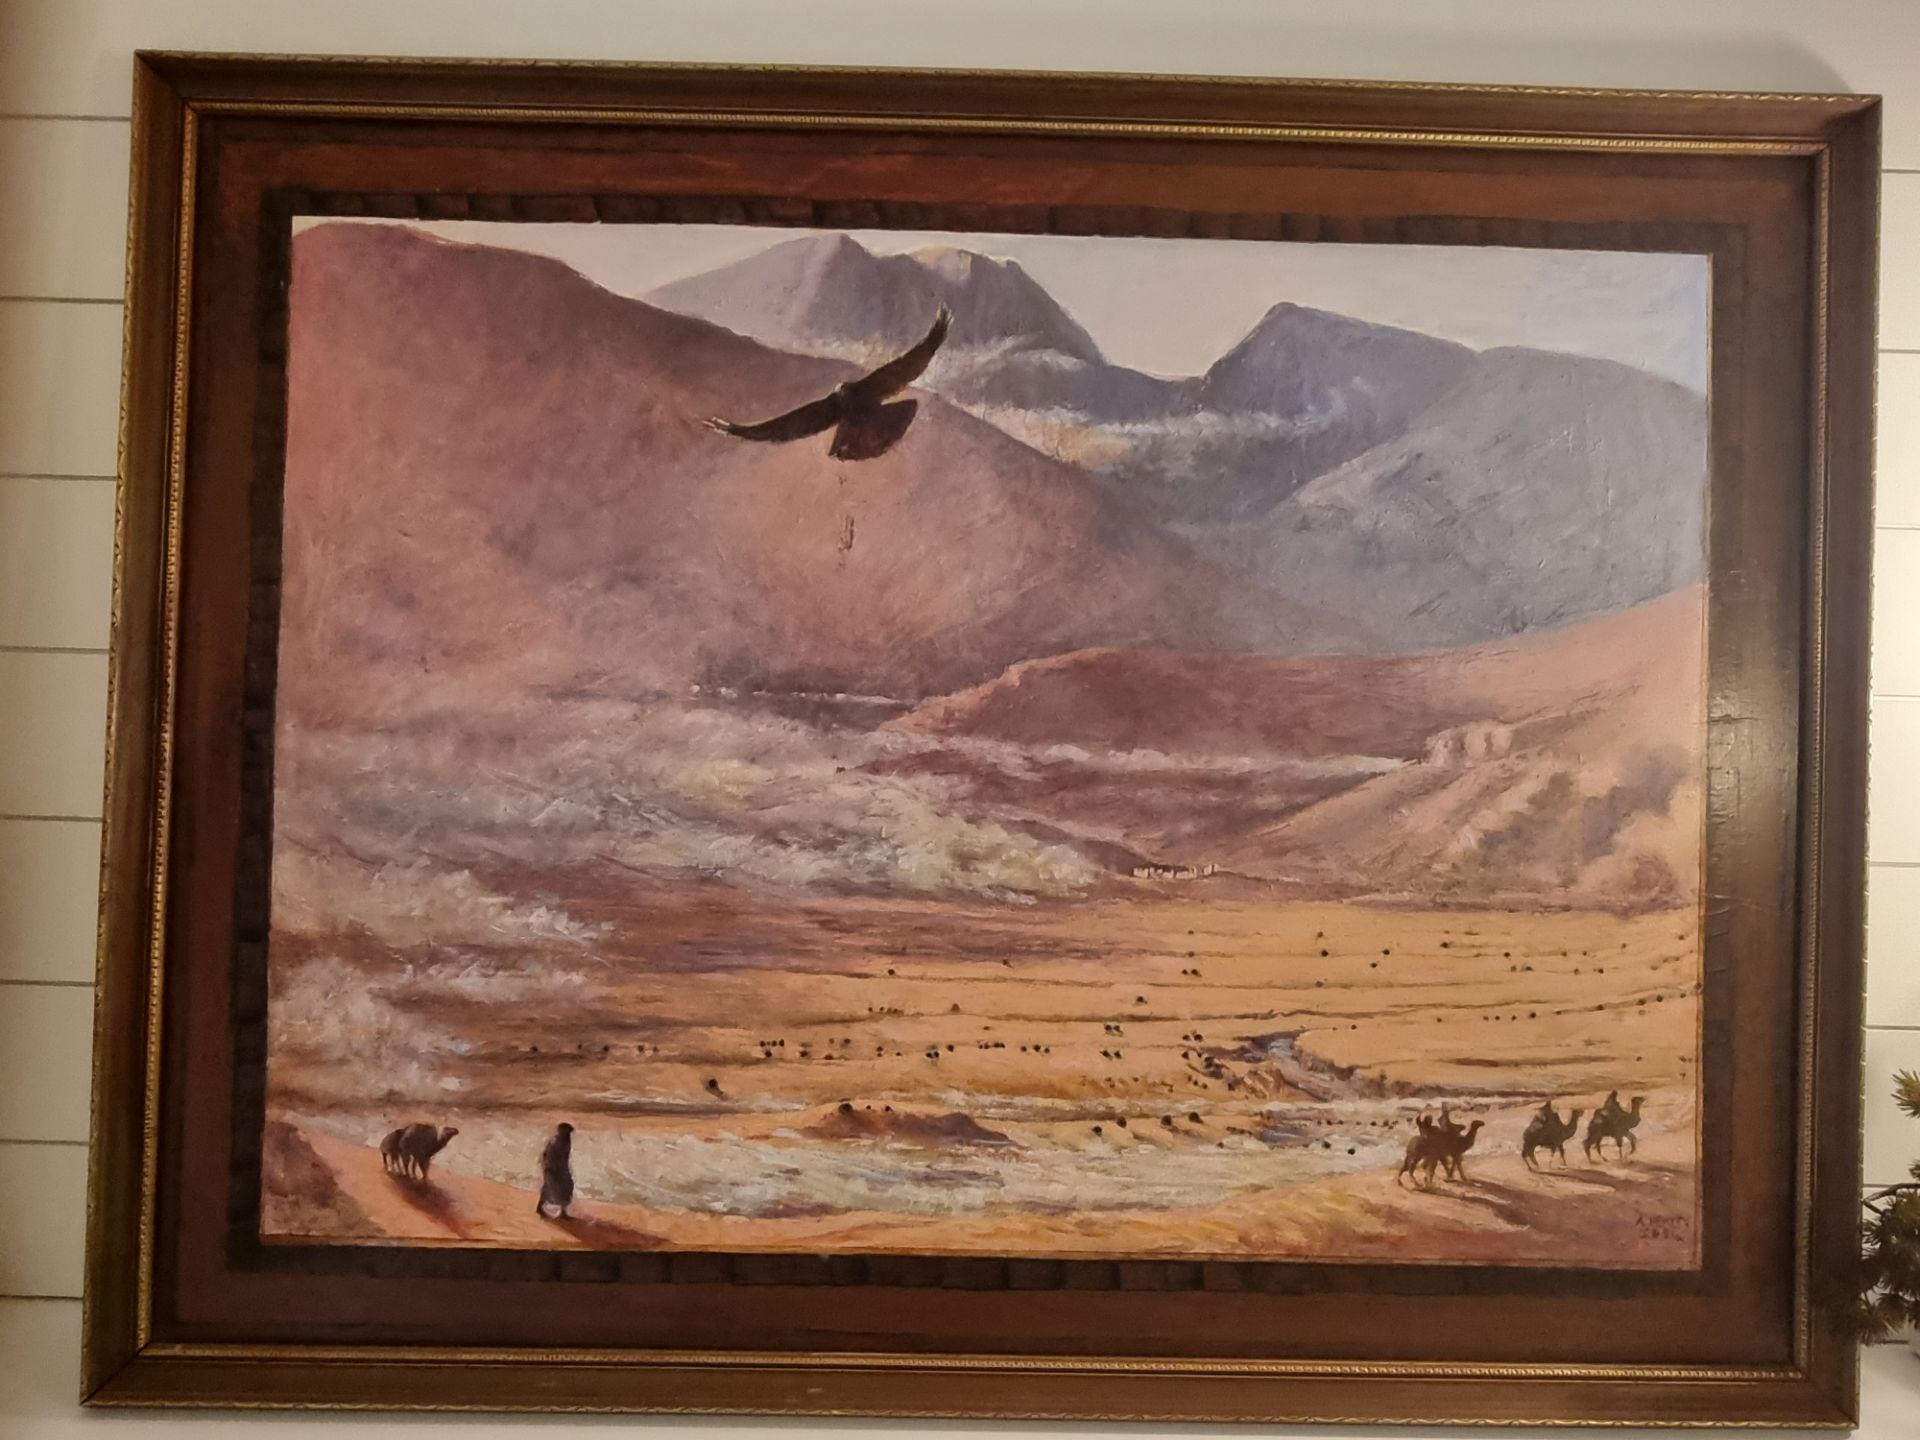 Framed Art Alan Healey (British) An interesting large vintage painting signed by Alan Healey and - Image 4 of 4